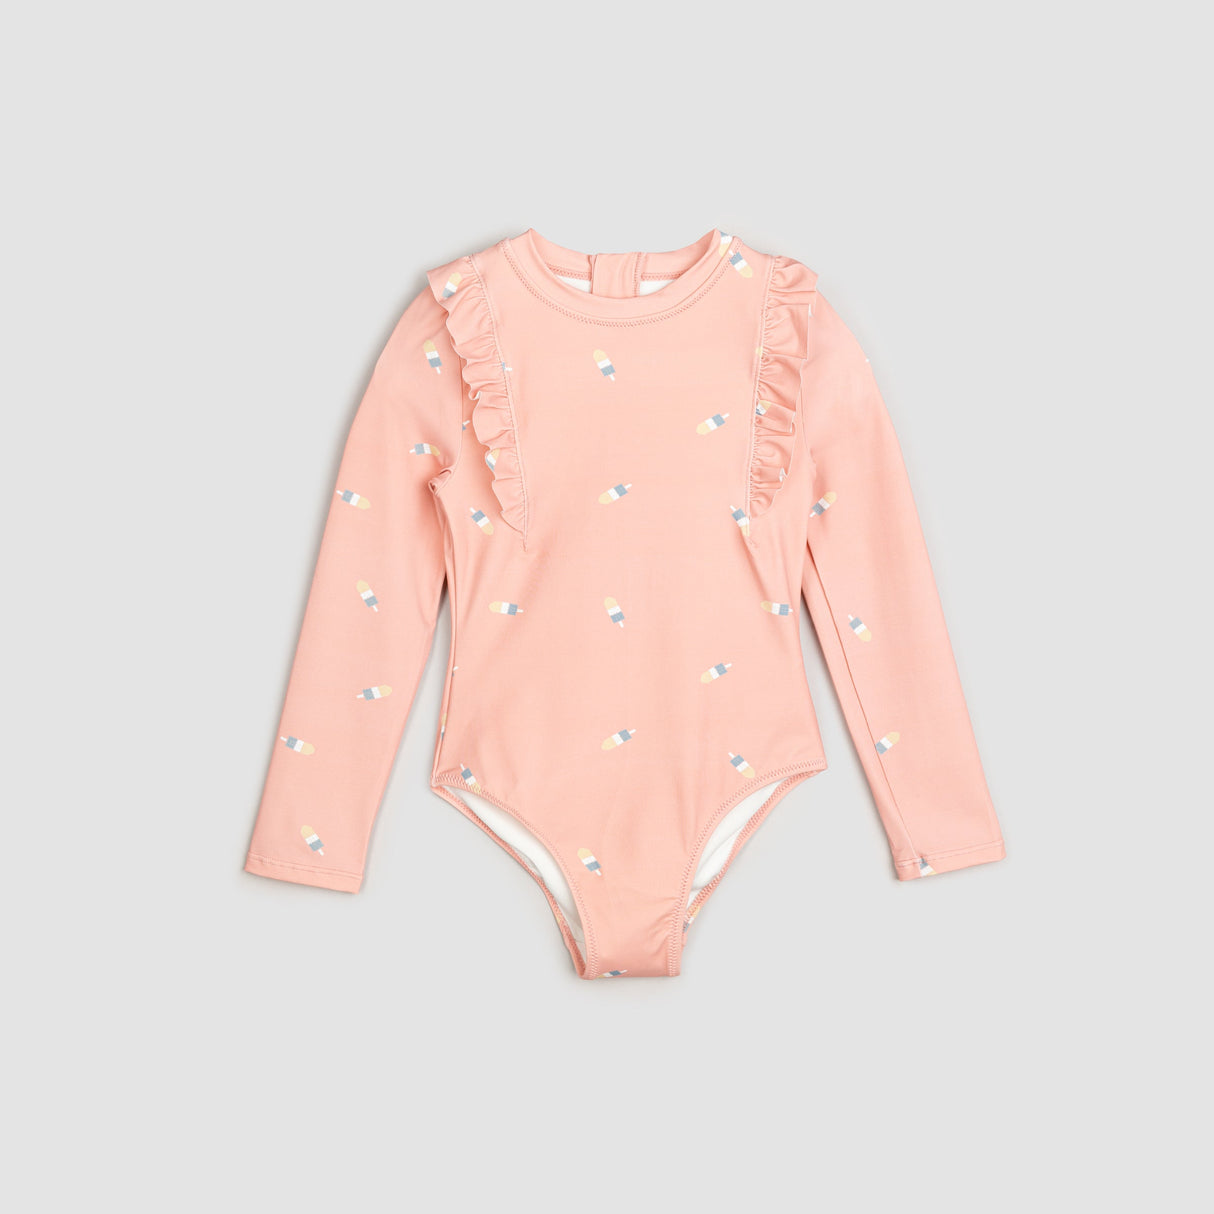 Popsicle Print on Dusty Pink Long-Sleeve One-Piece Swimsuit | Miles The Label - Jenni Kidz